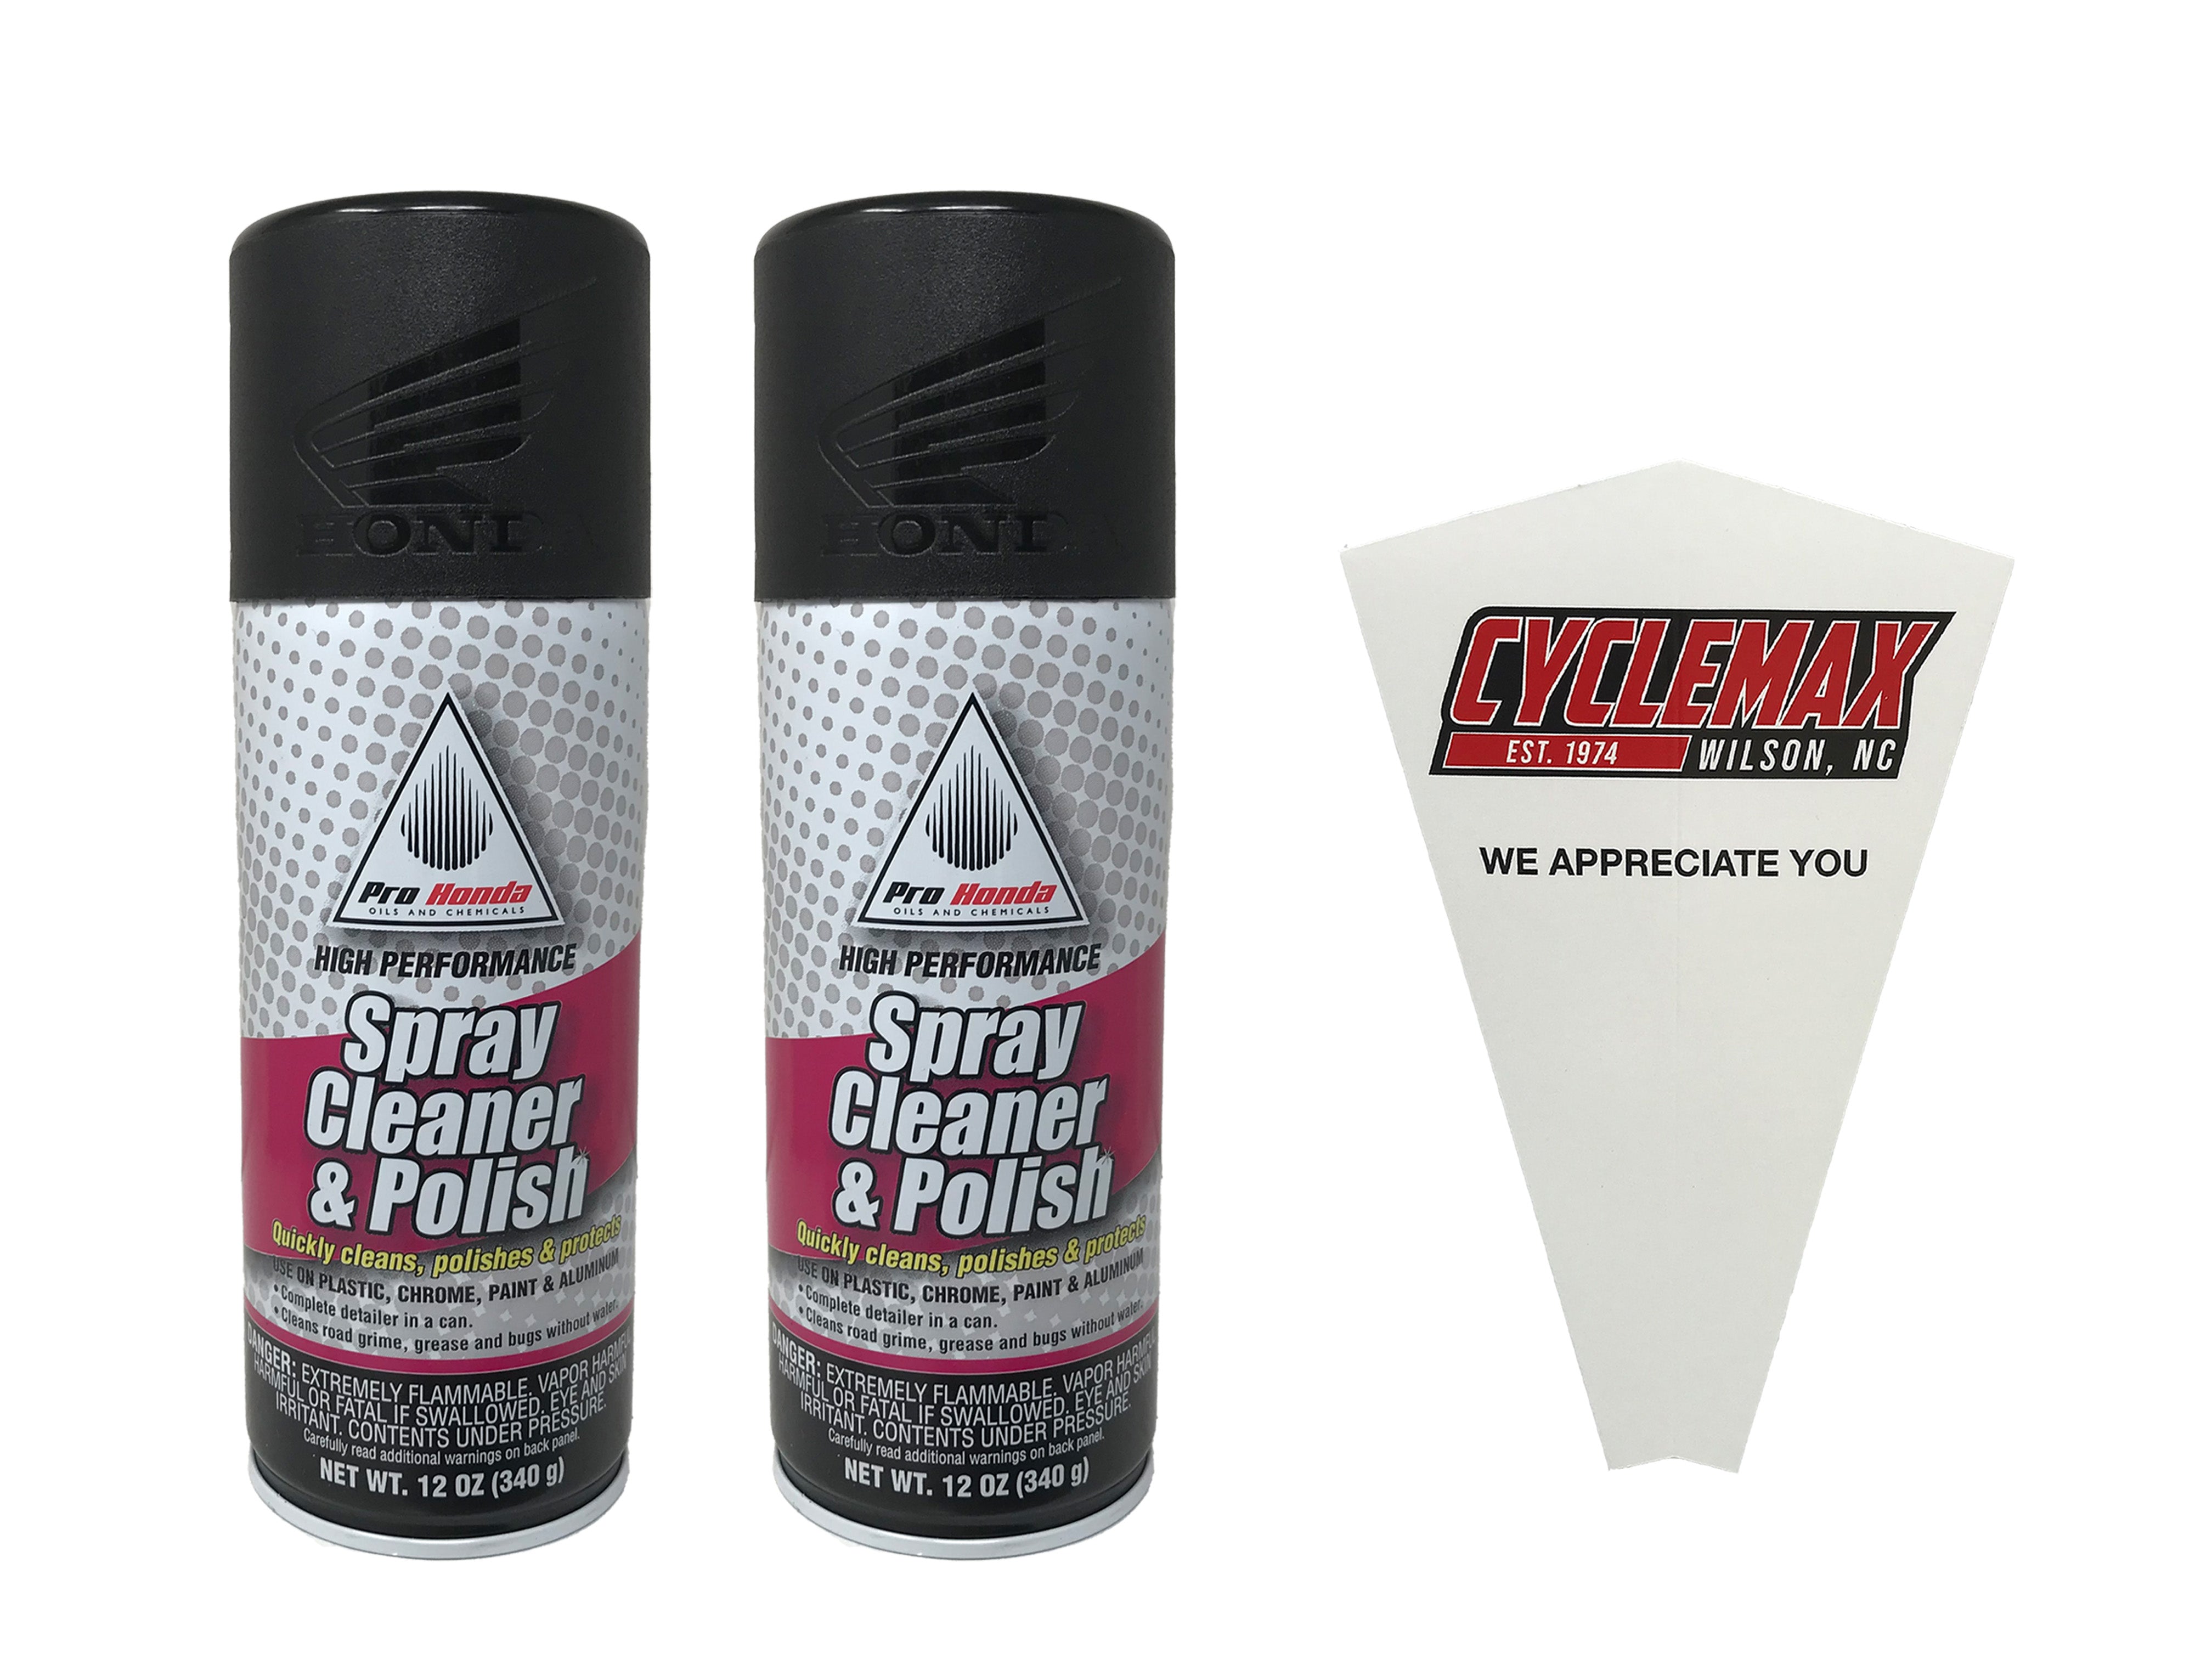 CYCLEMAX Two Pack for Honda Spray Cleaner & Polish 08732-SCP00 Contains Two 12oz Cans and a Funnel